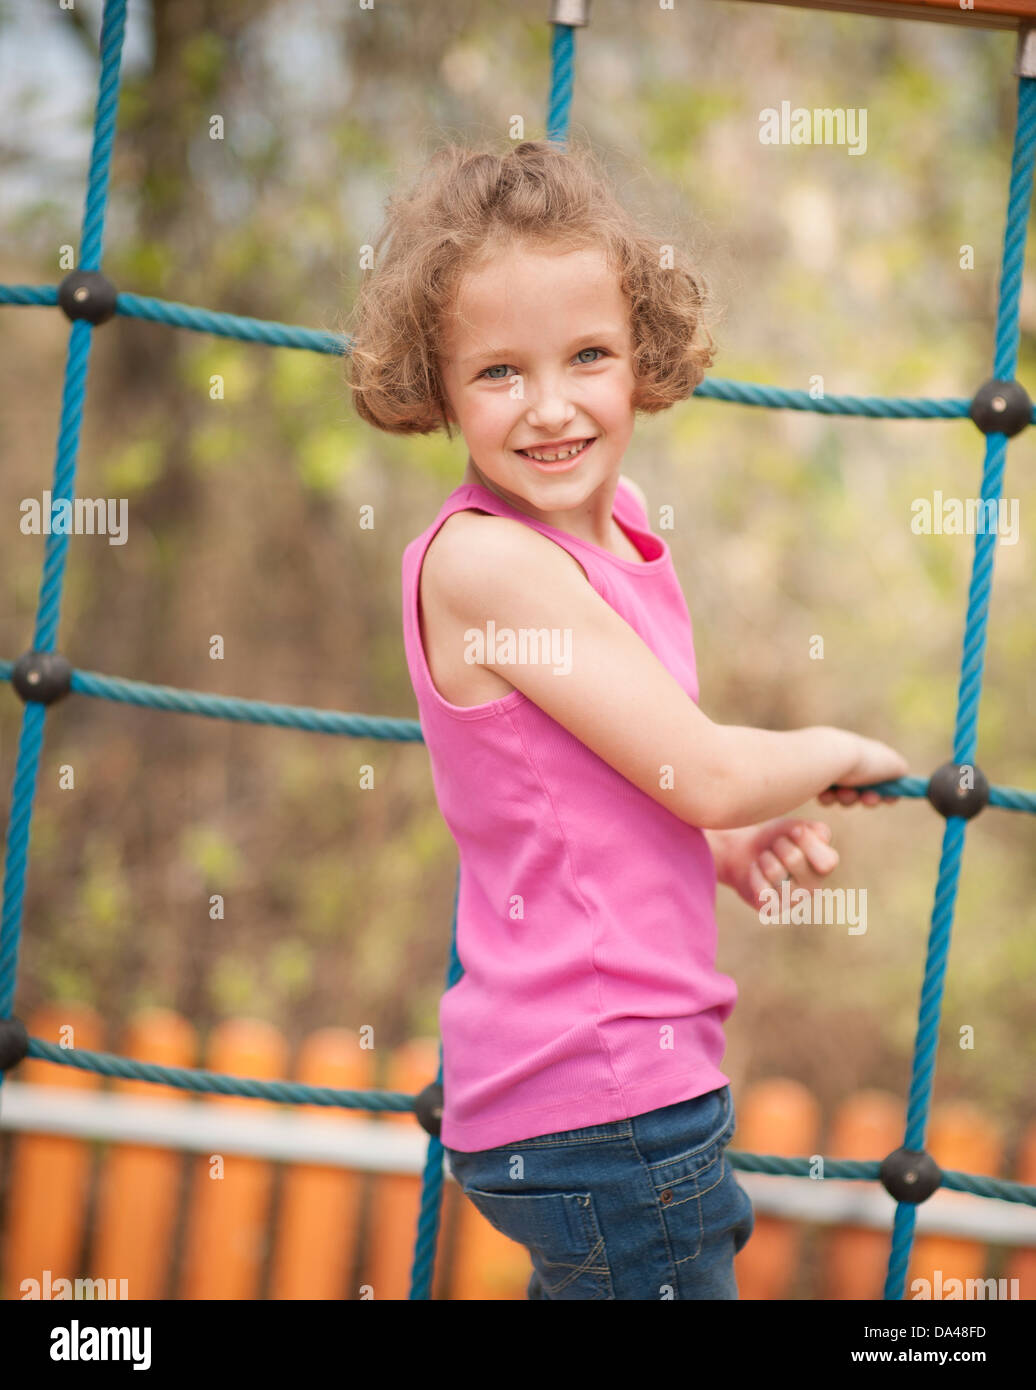 Young girl on climbing net turning to face camera Stock Photo